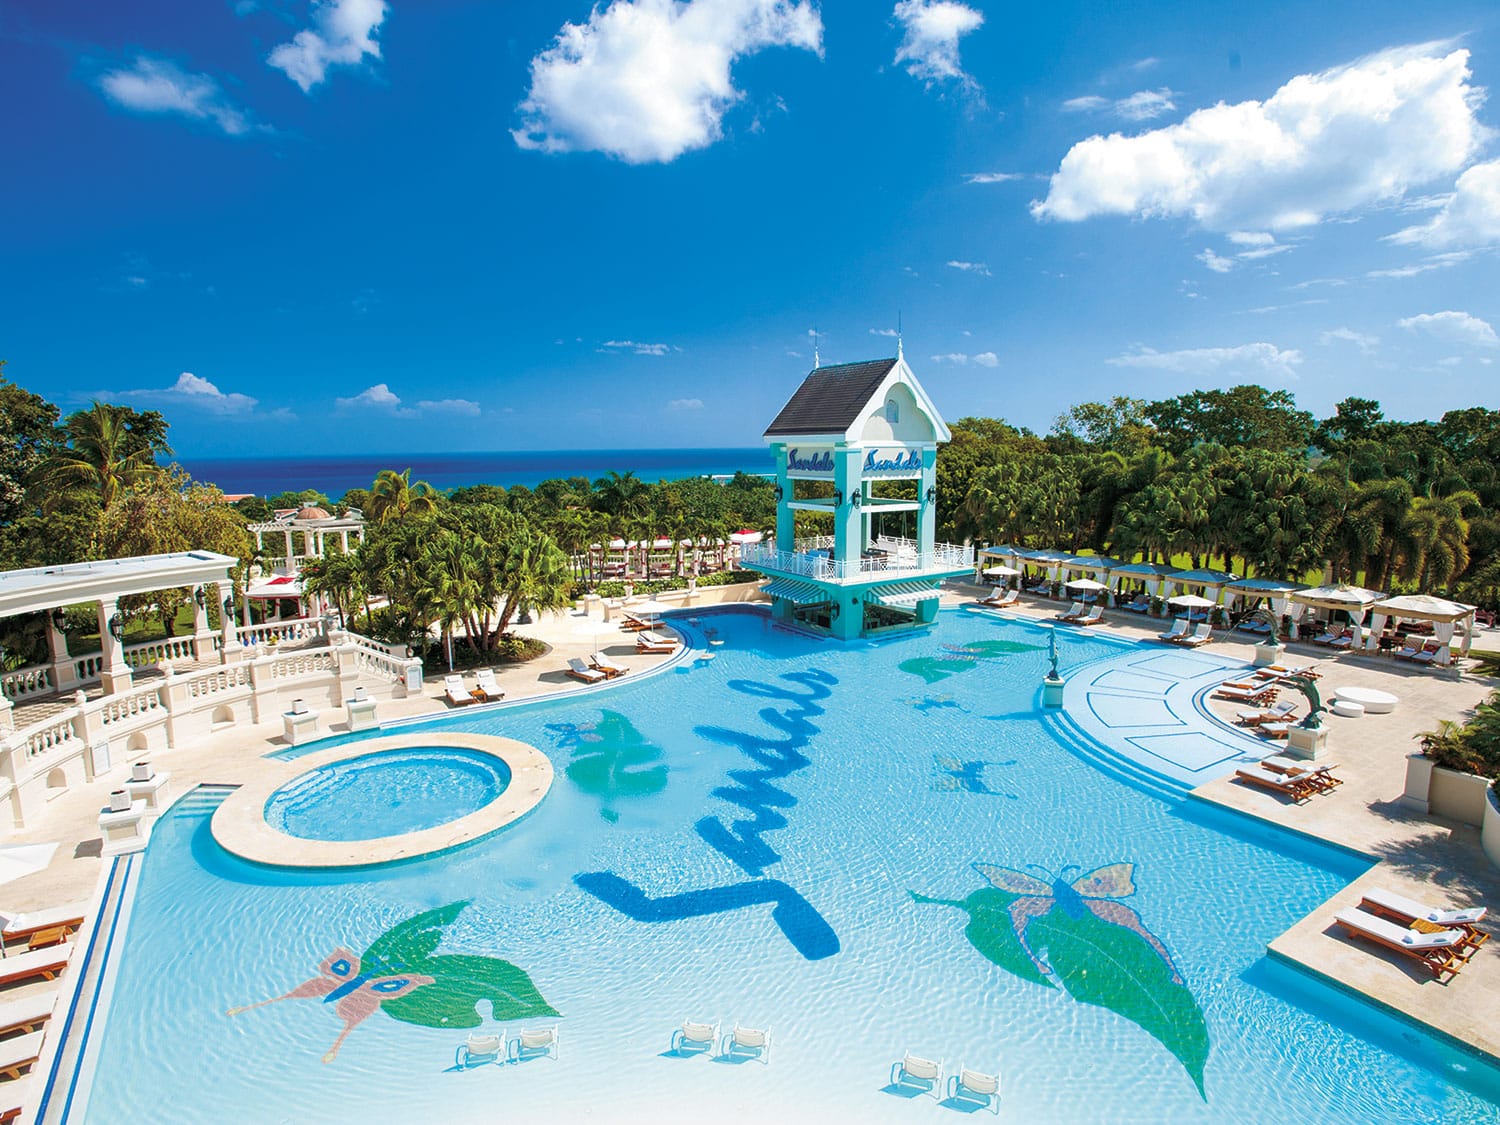 The spacious pool at Sandals Ochi all-inclusive